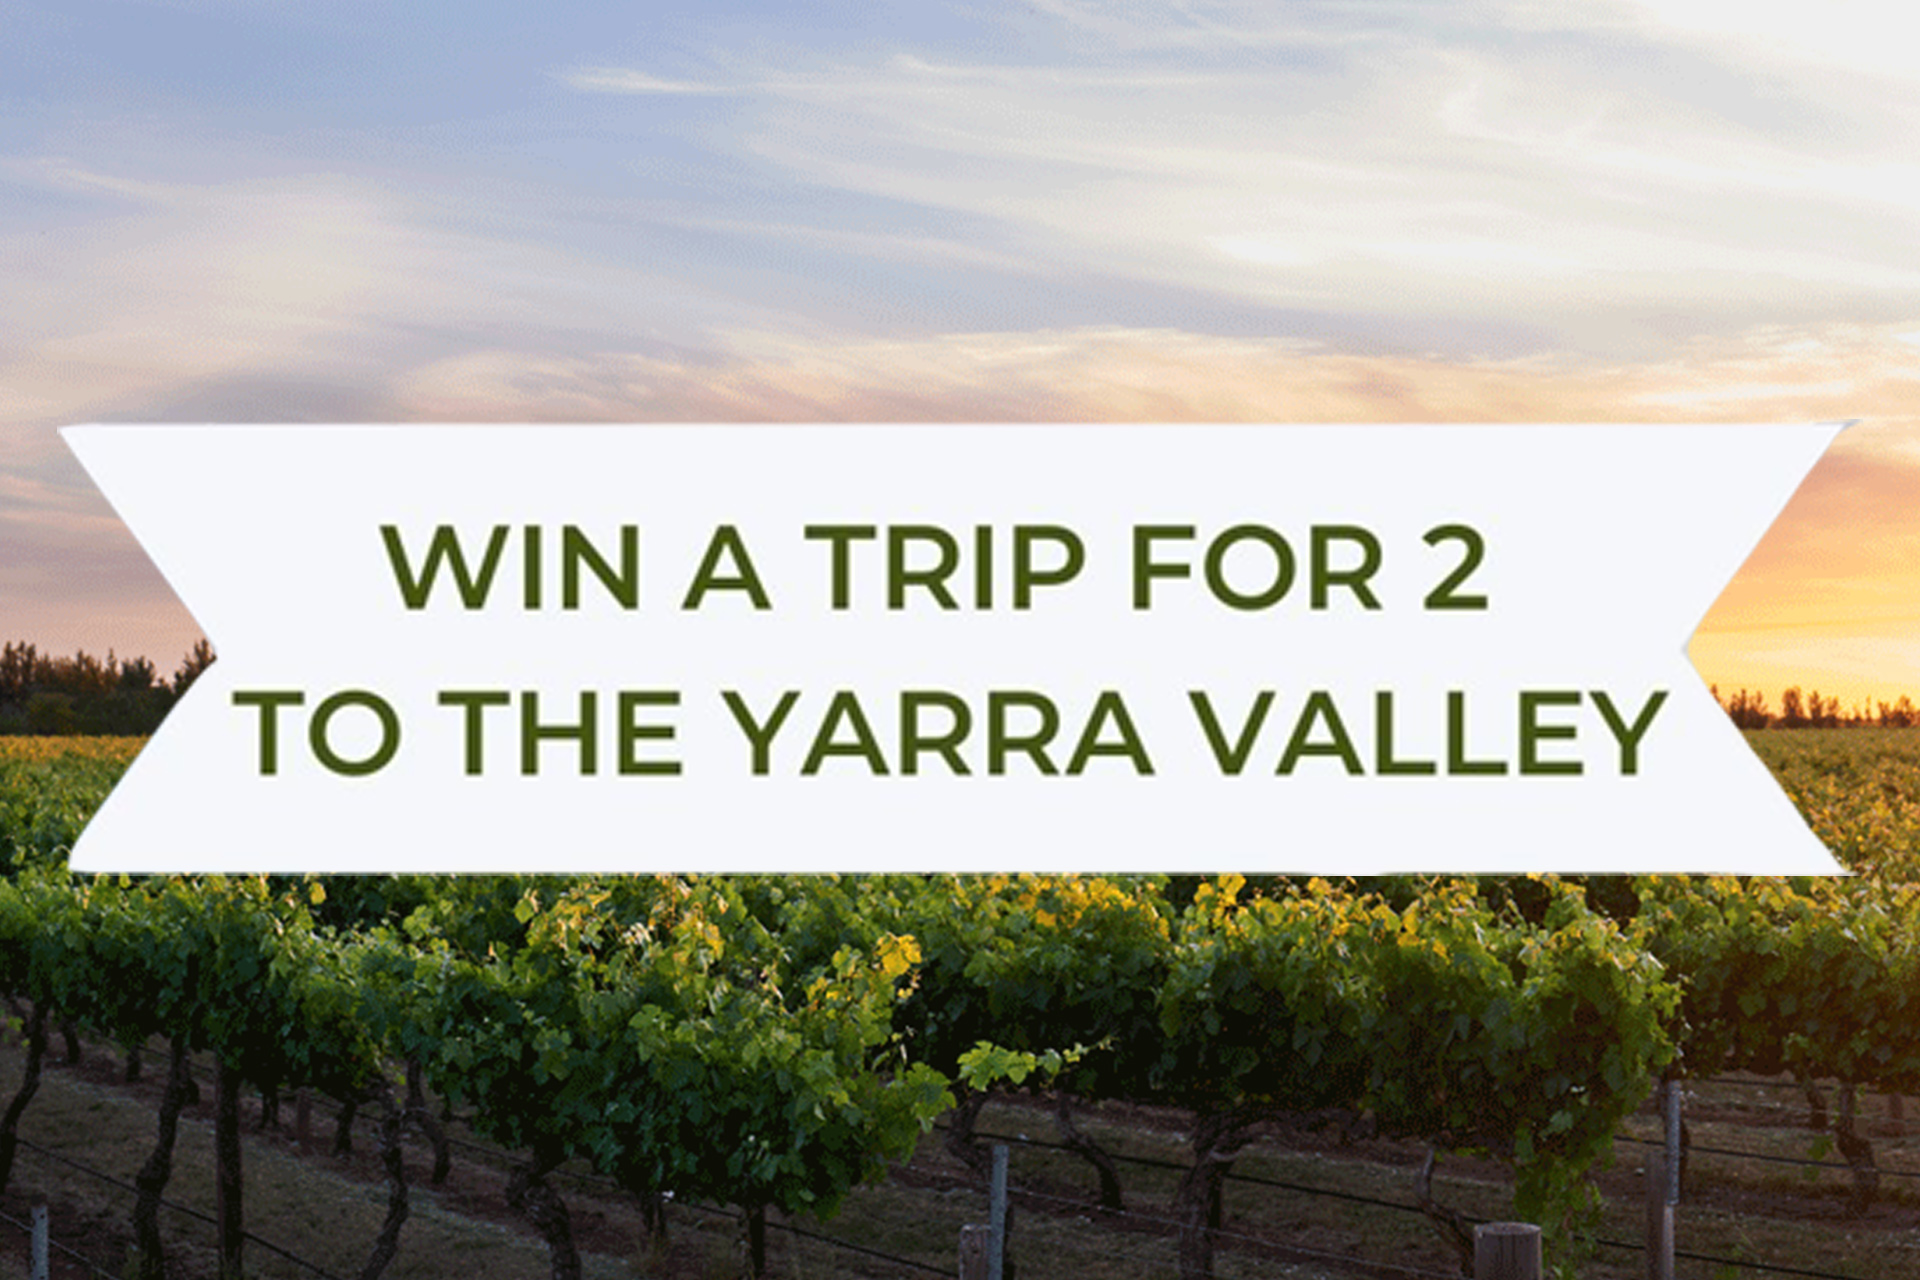 Win A Trip For 2 To The Yarra Valley